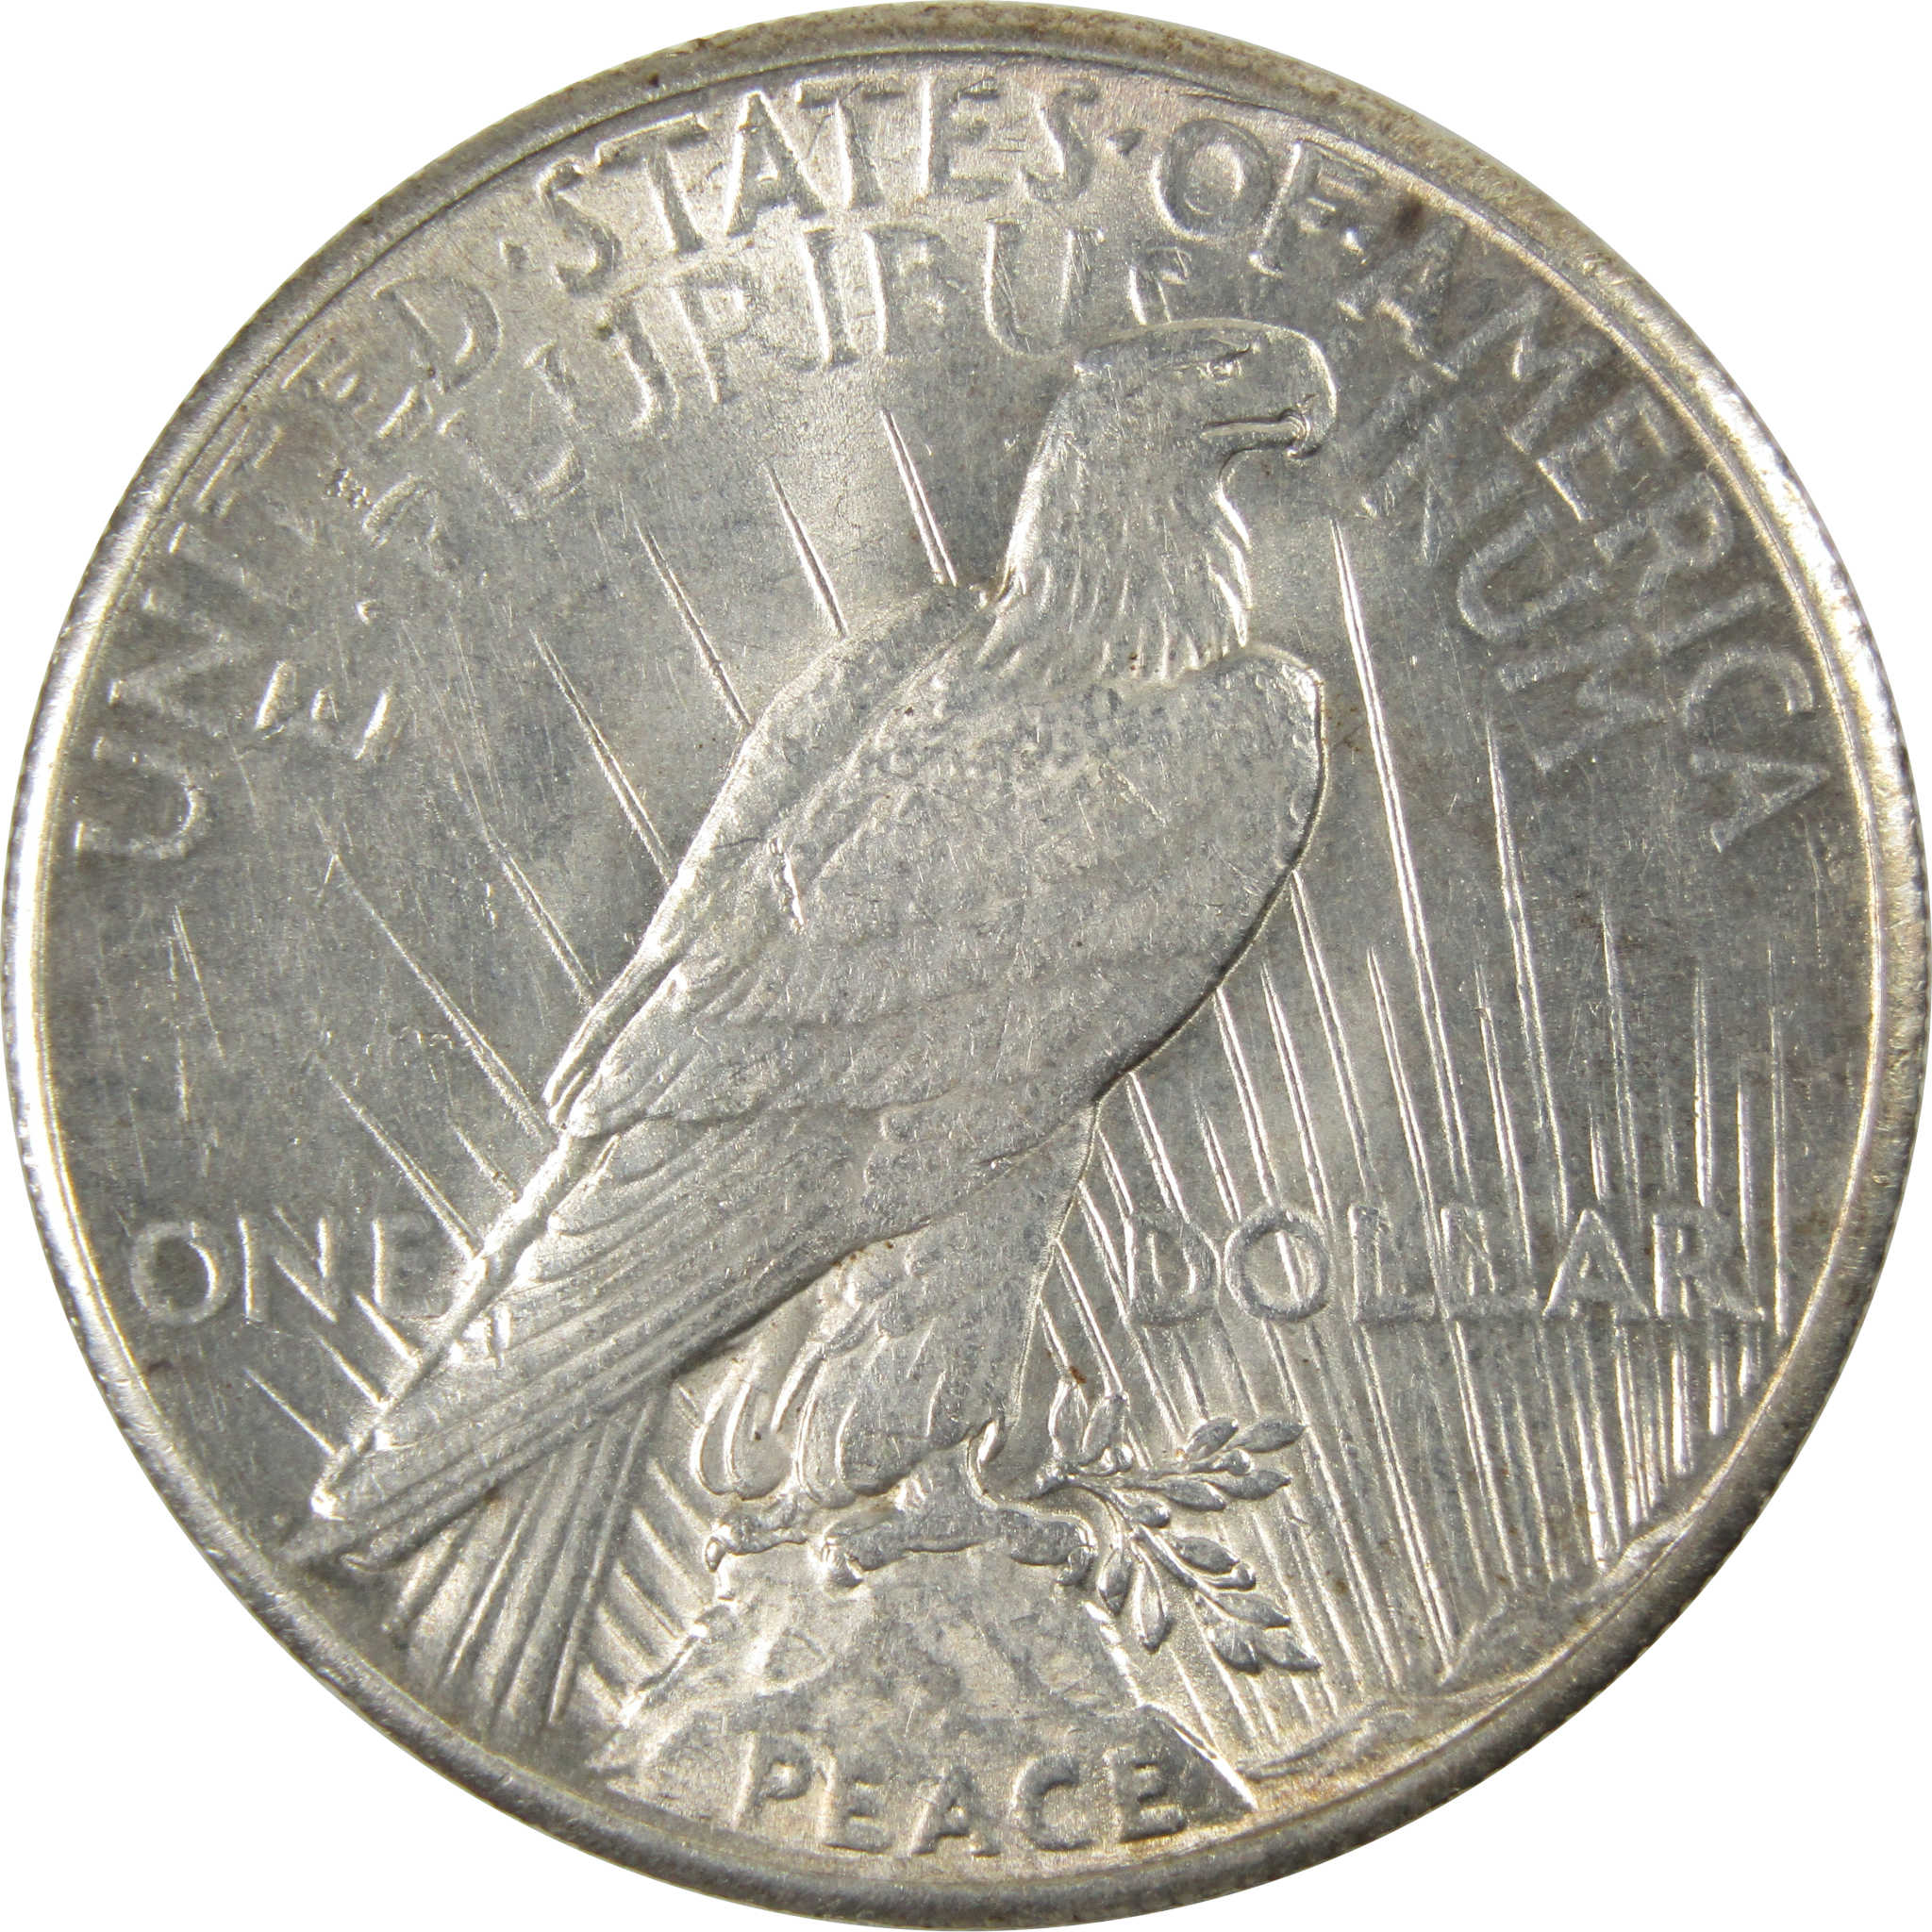 1928 Peace Dollar XF EF Extremely Fine 90% Silver $1 Coin SKU:I8299